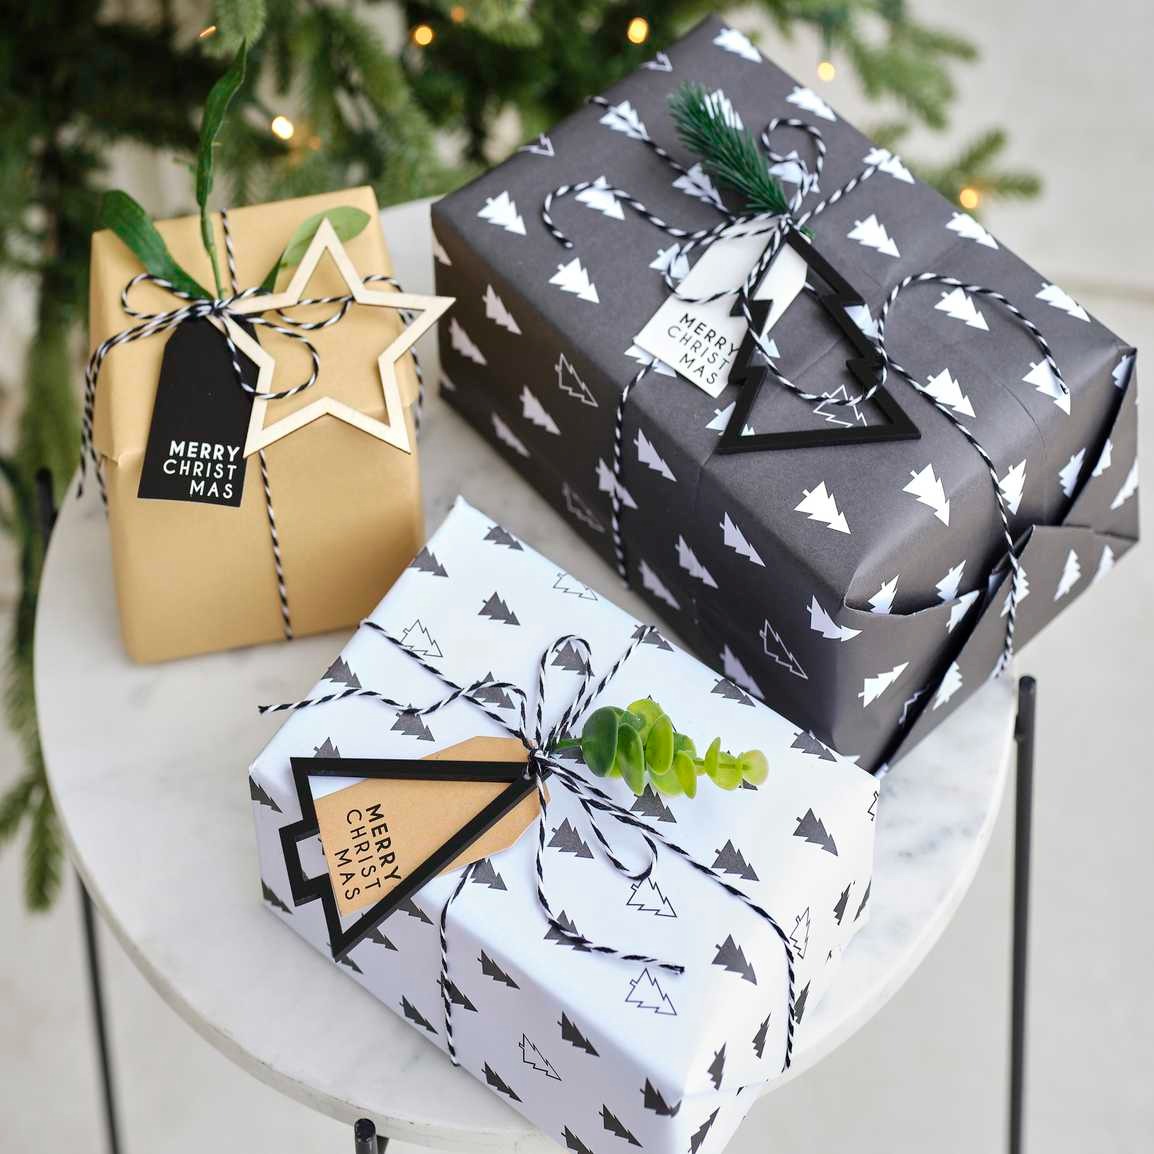 Gift wrapping set with black and white Christmas trees